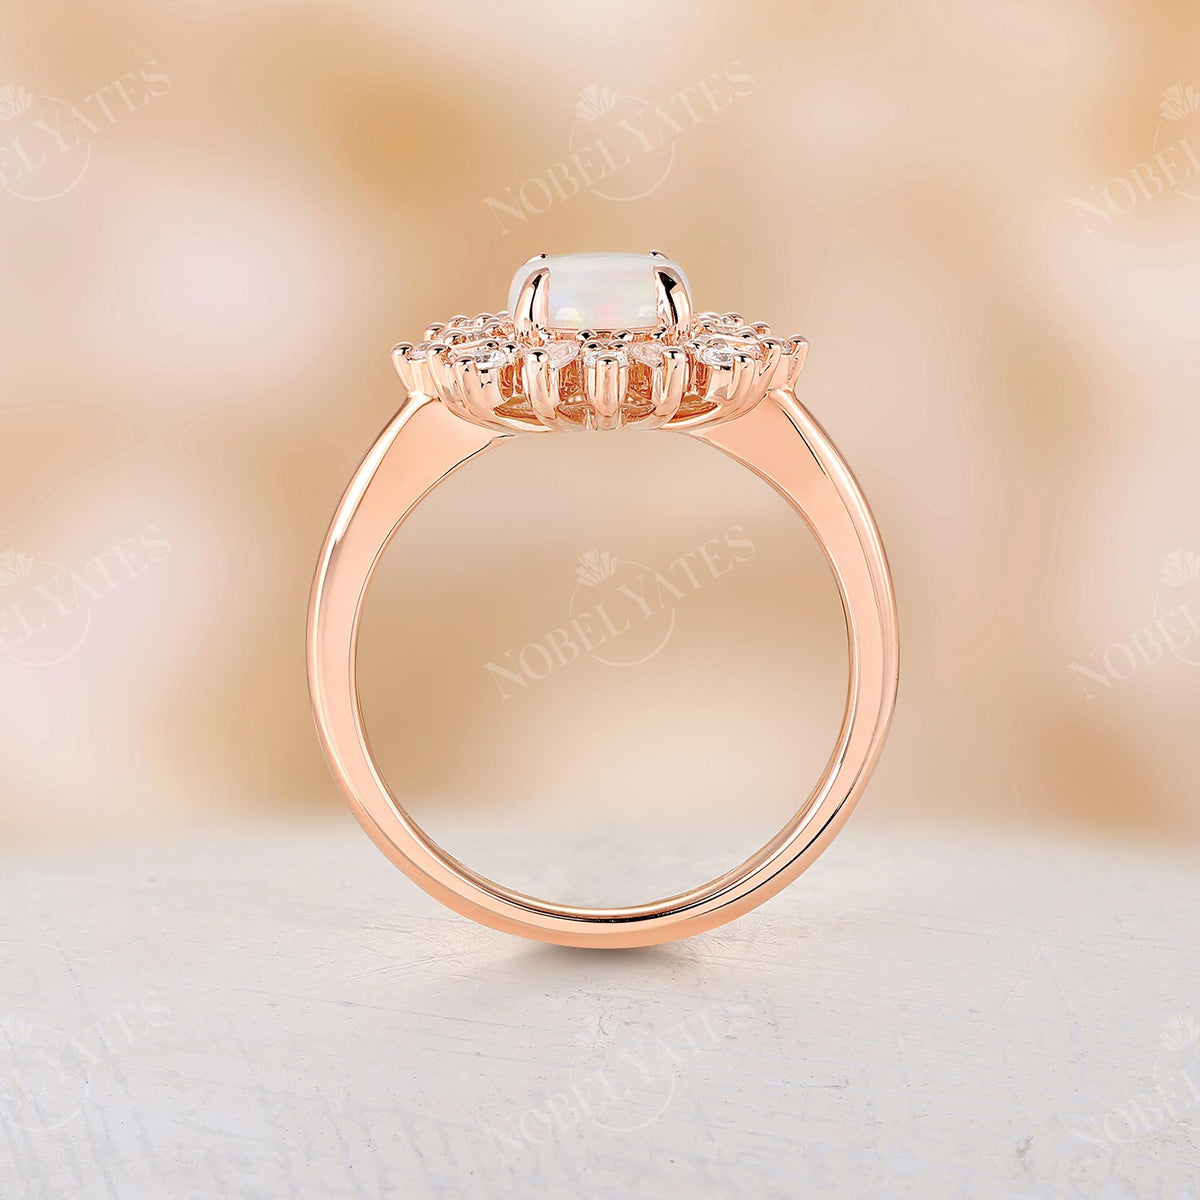 Art deco Round Opal Engagement Ring Rose Gold